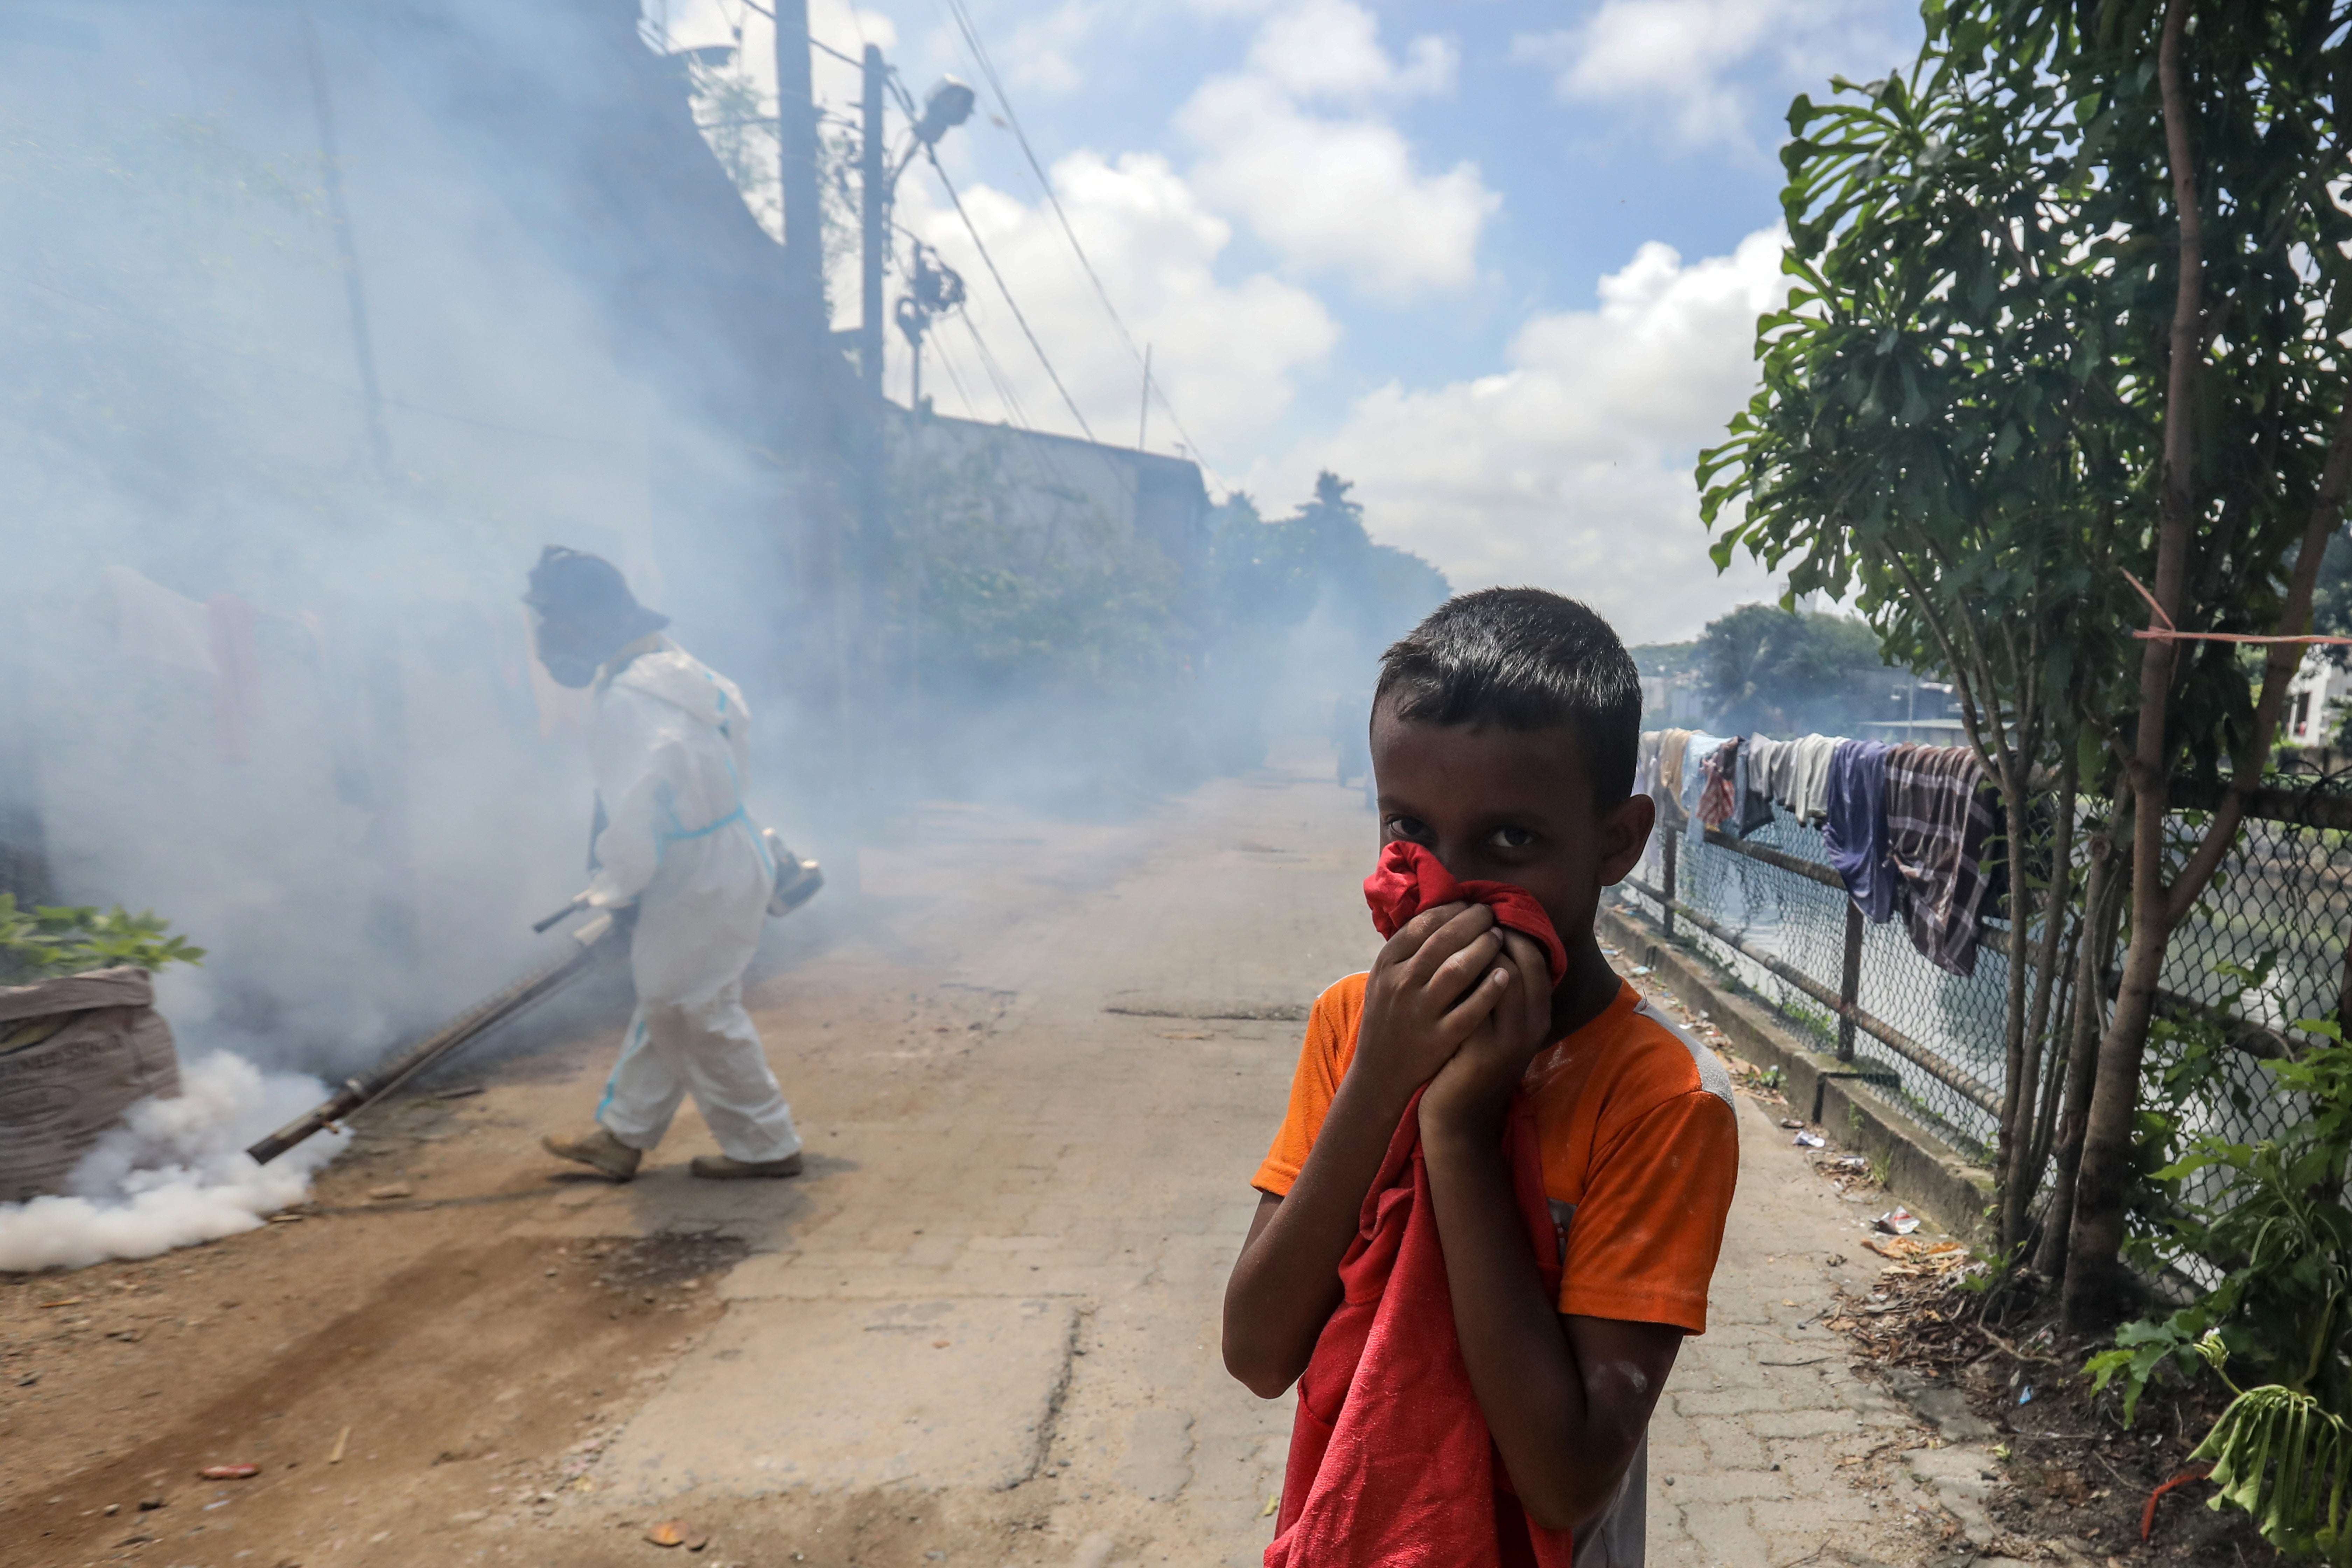 A boy covers his mouth as a Sri Lankan health worker fumigates insecticide to curb mosquito breeding in an attempt to control dengue fever in Colombo, Sri Lanka